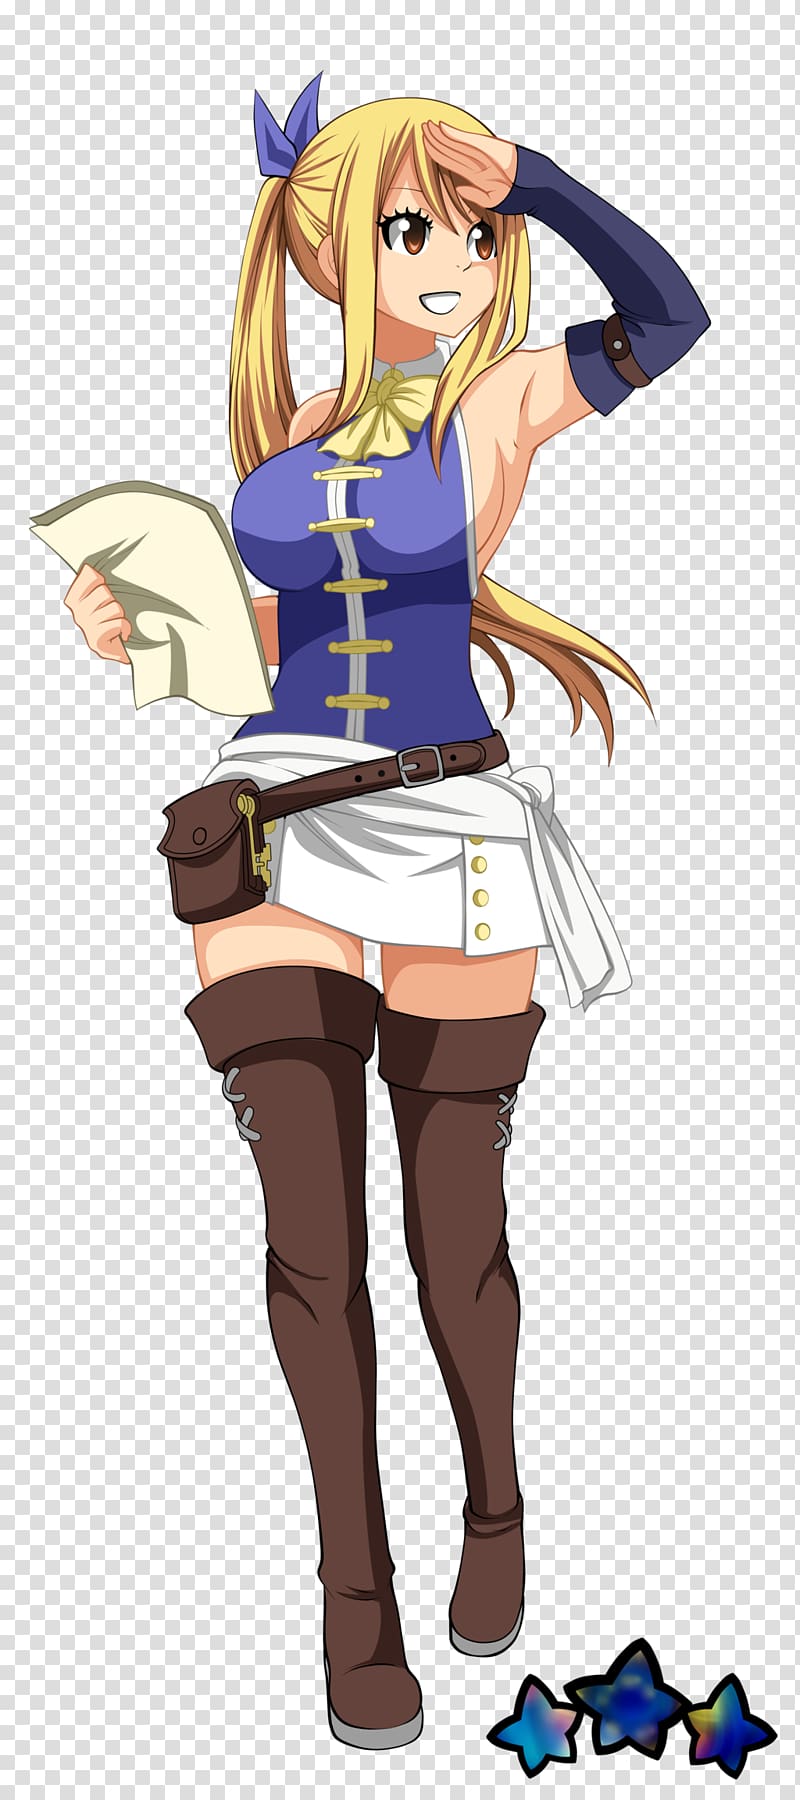 Lucy Heartfilia Anime Fairy Tail Natsu Dragneel , Anime transparent background PNG clipart